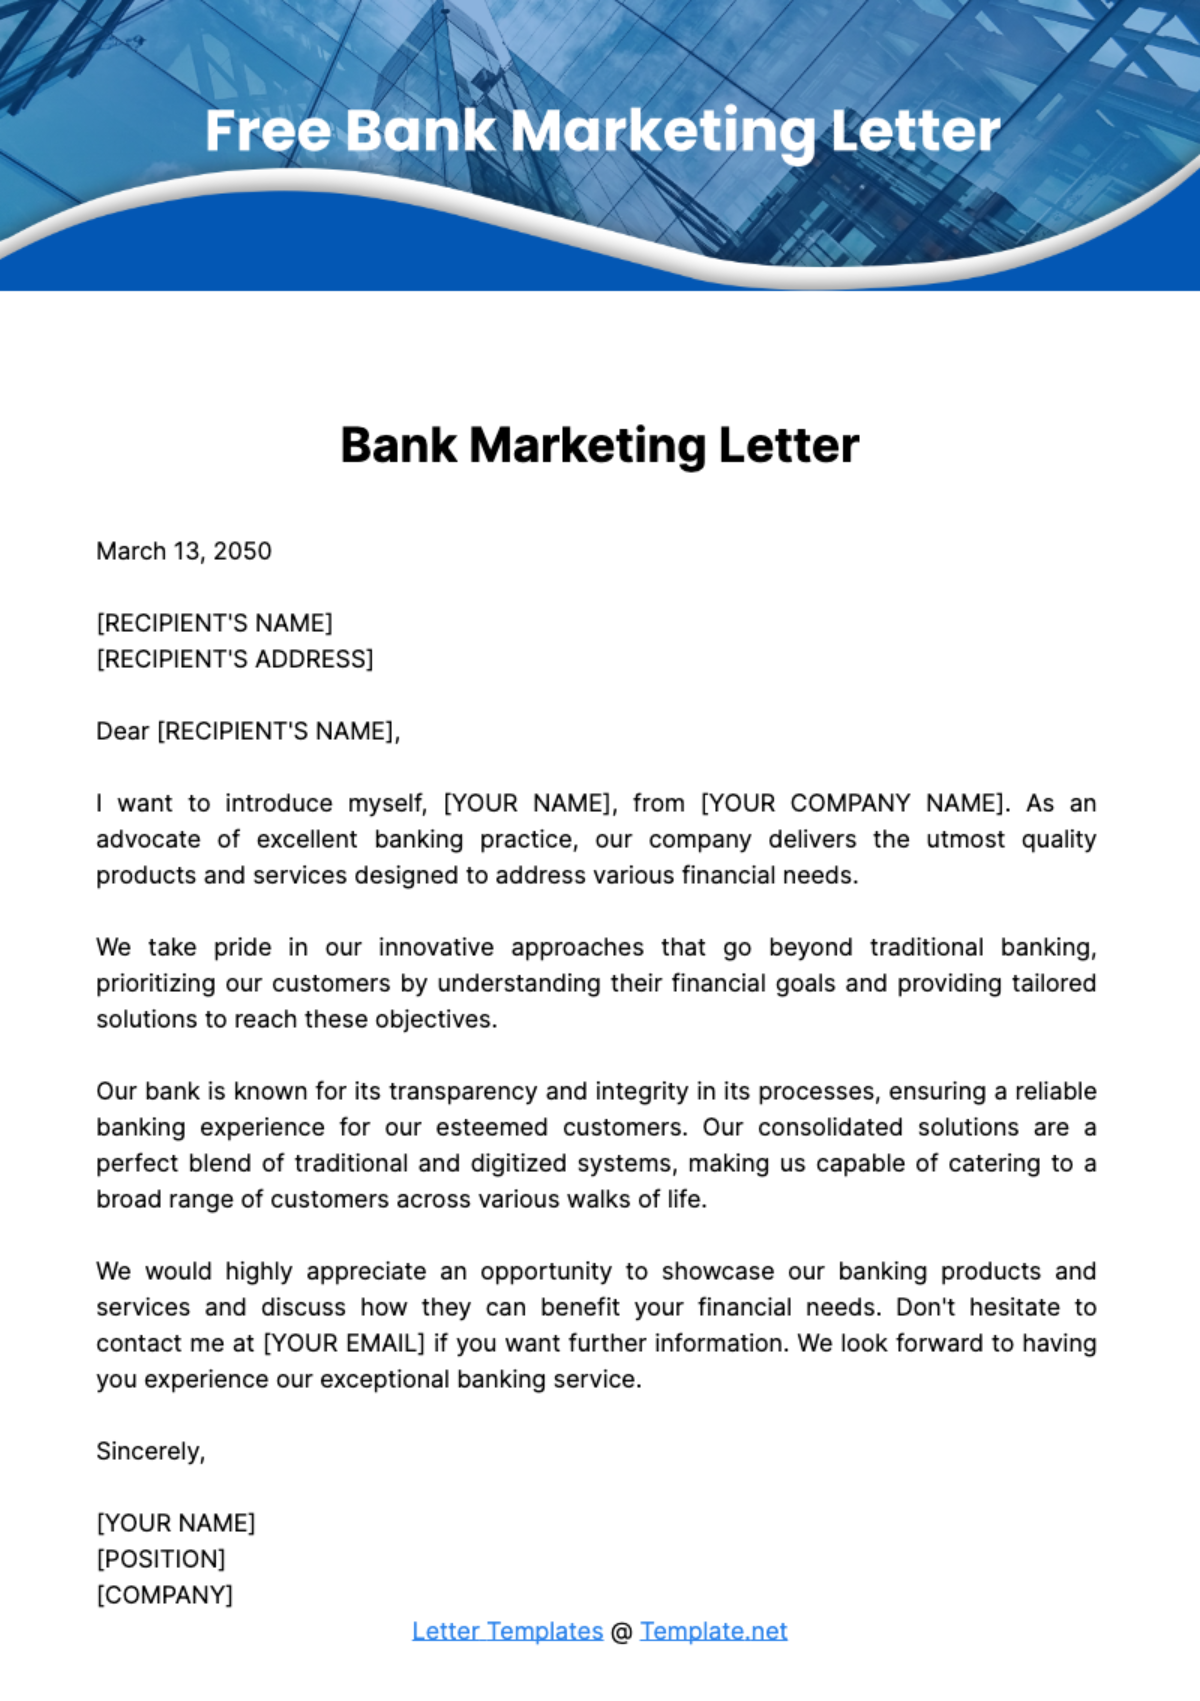 Free Bank Marketing Letter Template